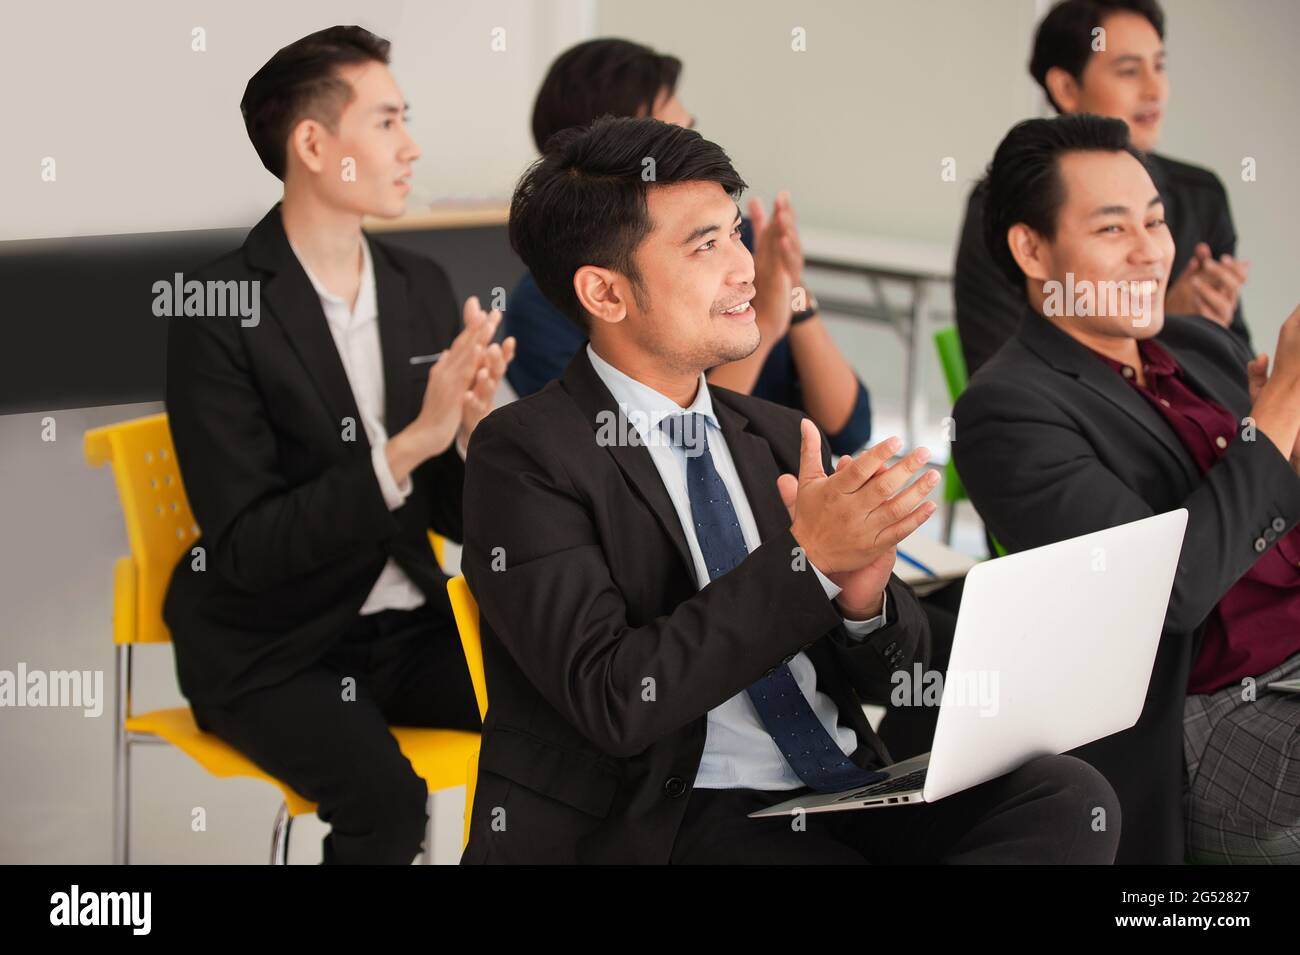 People congratulate on business meeting, People clap their congratulate in seminar Stock Photo